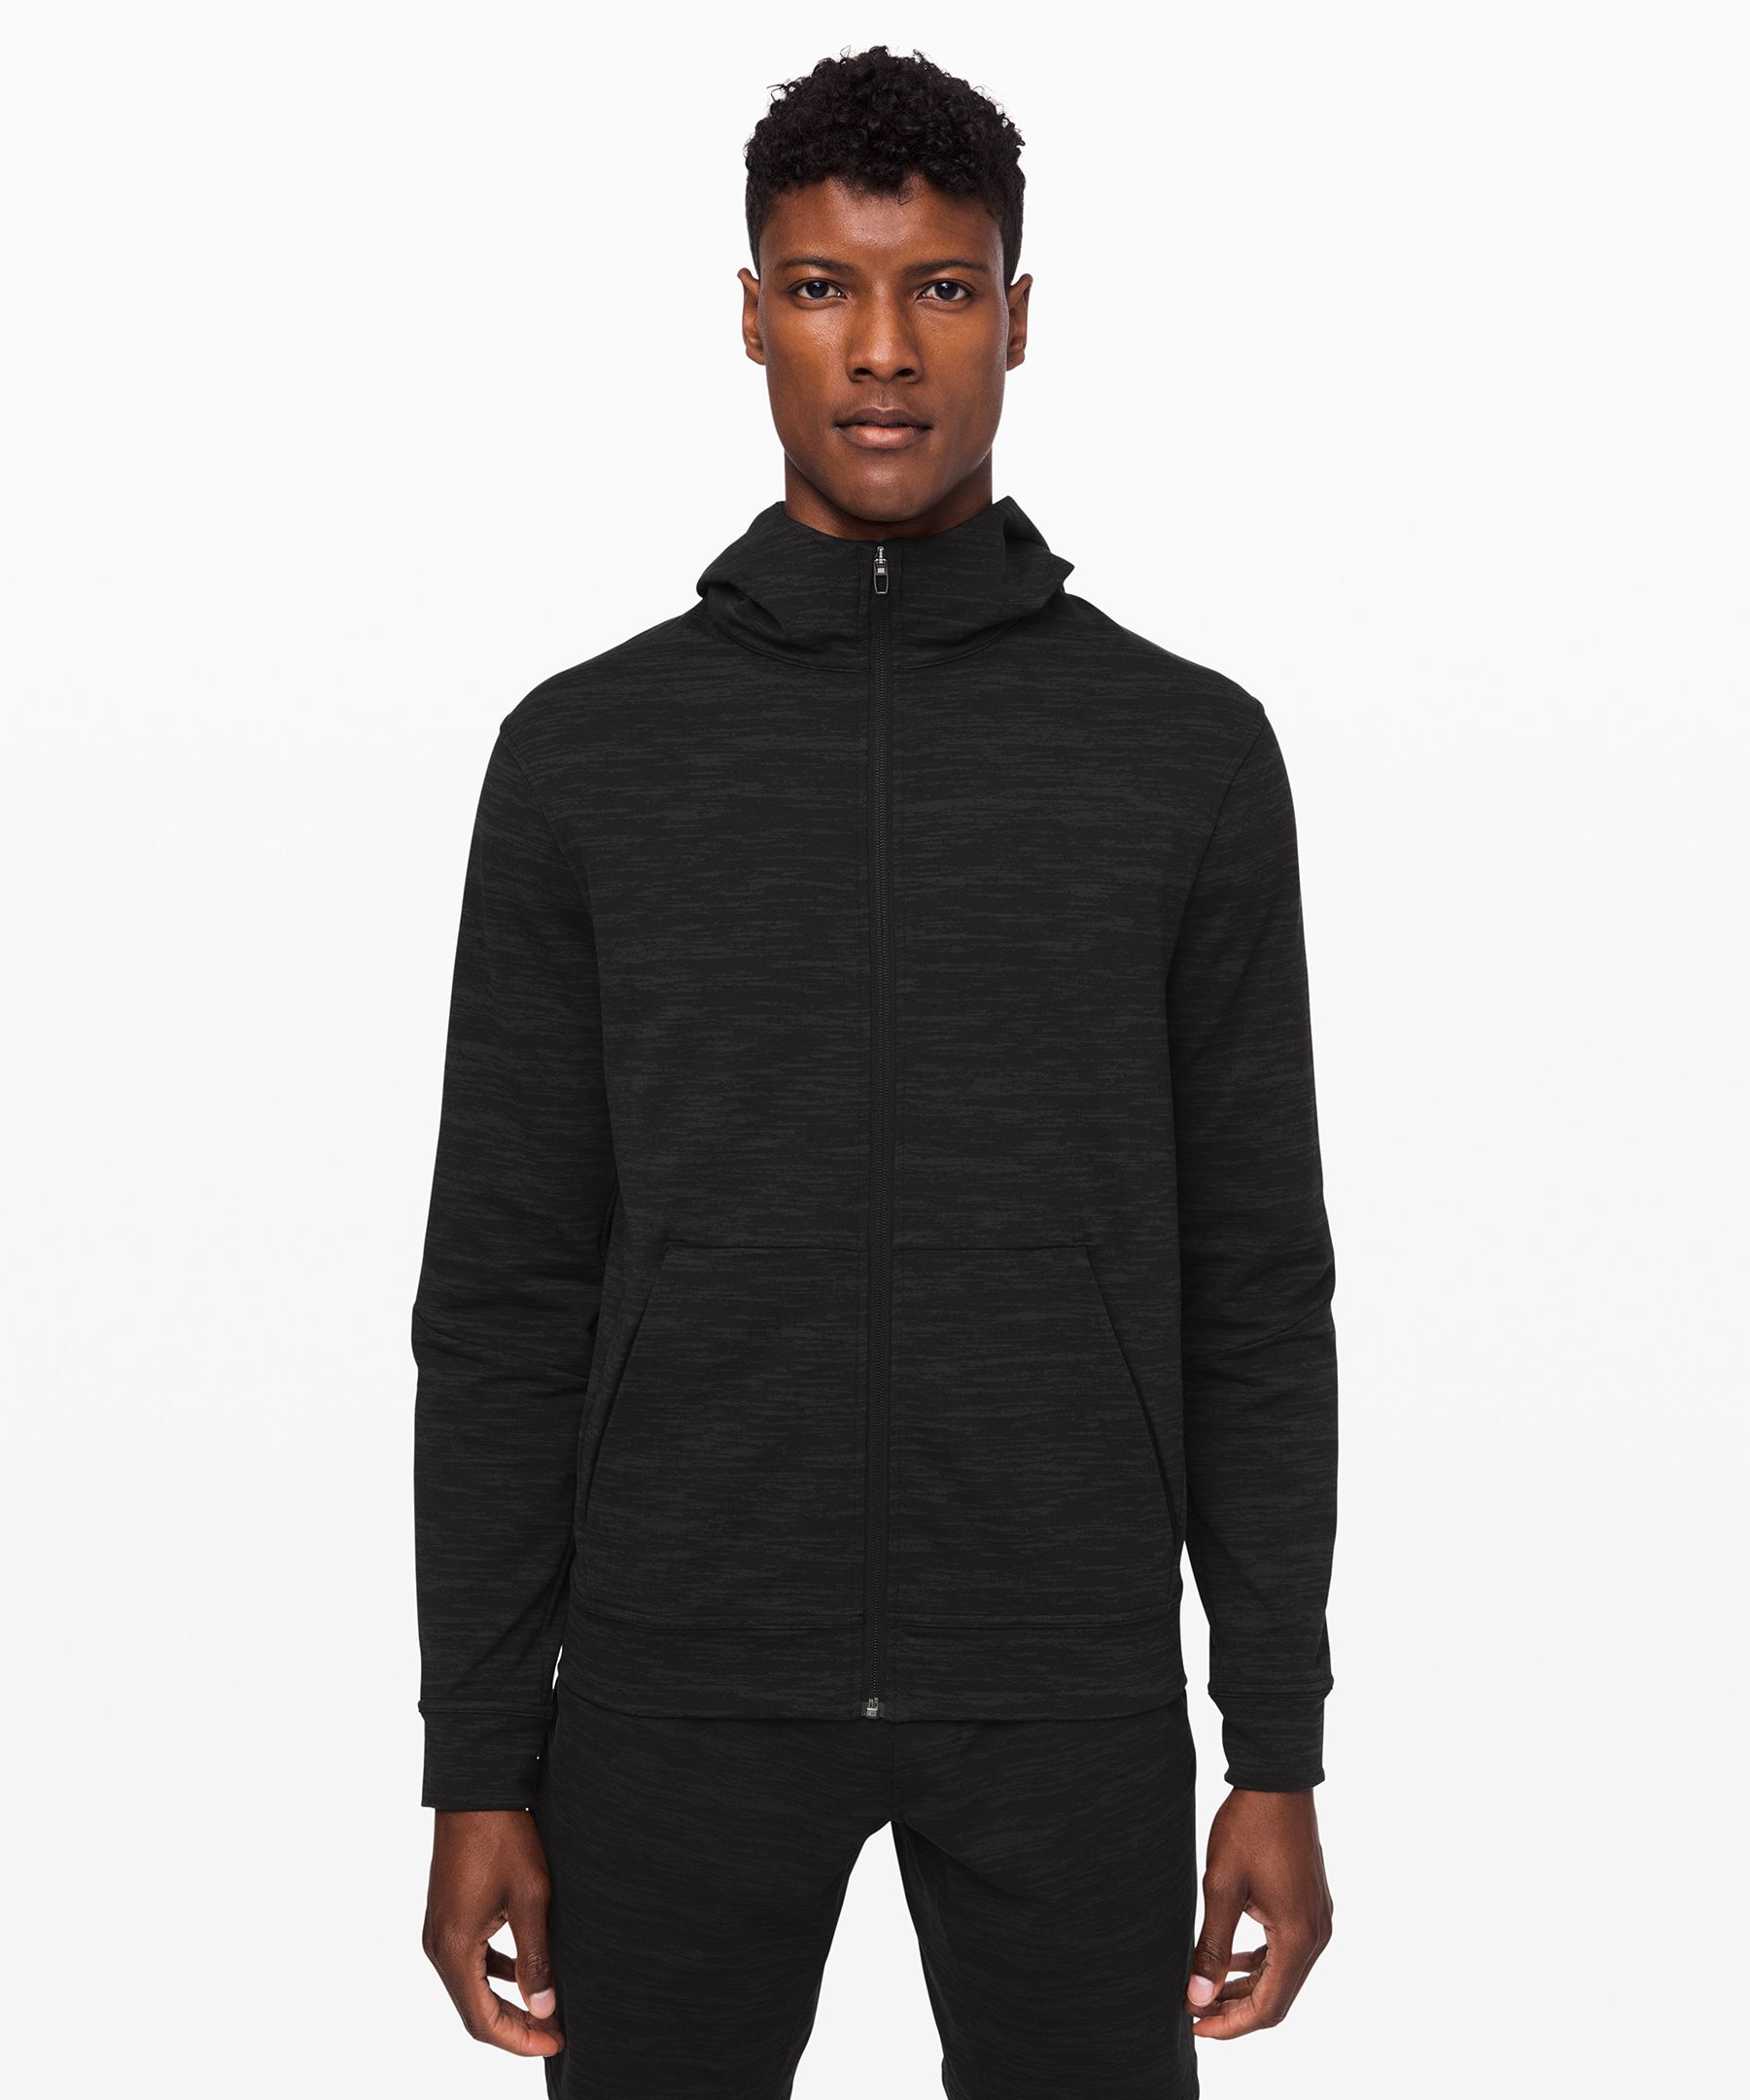 lululemon hoodie: Get the City Sweat pullover for up to 58% off